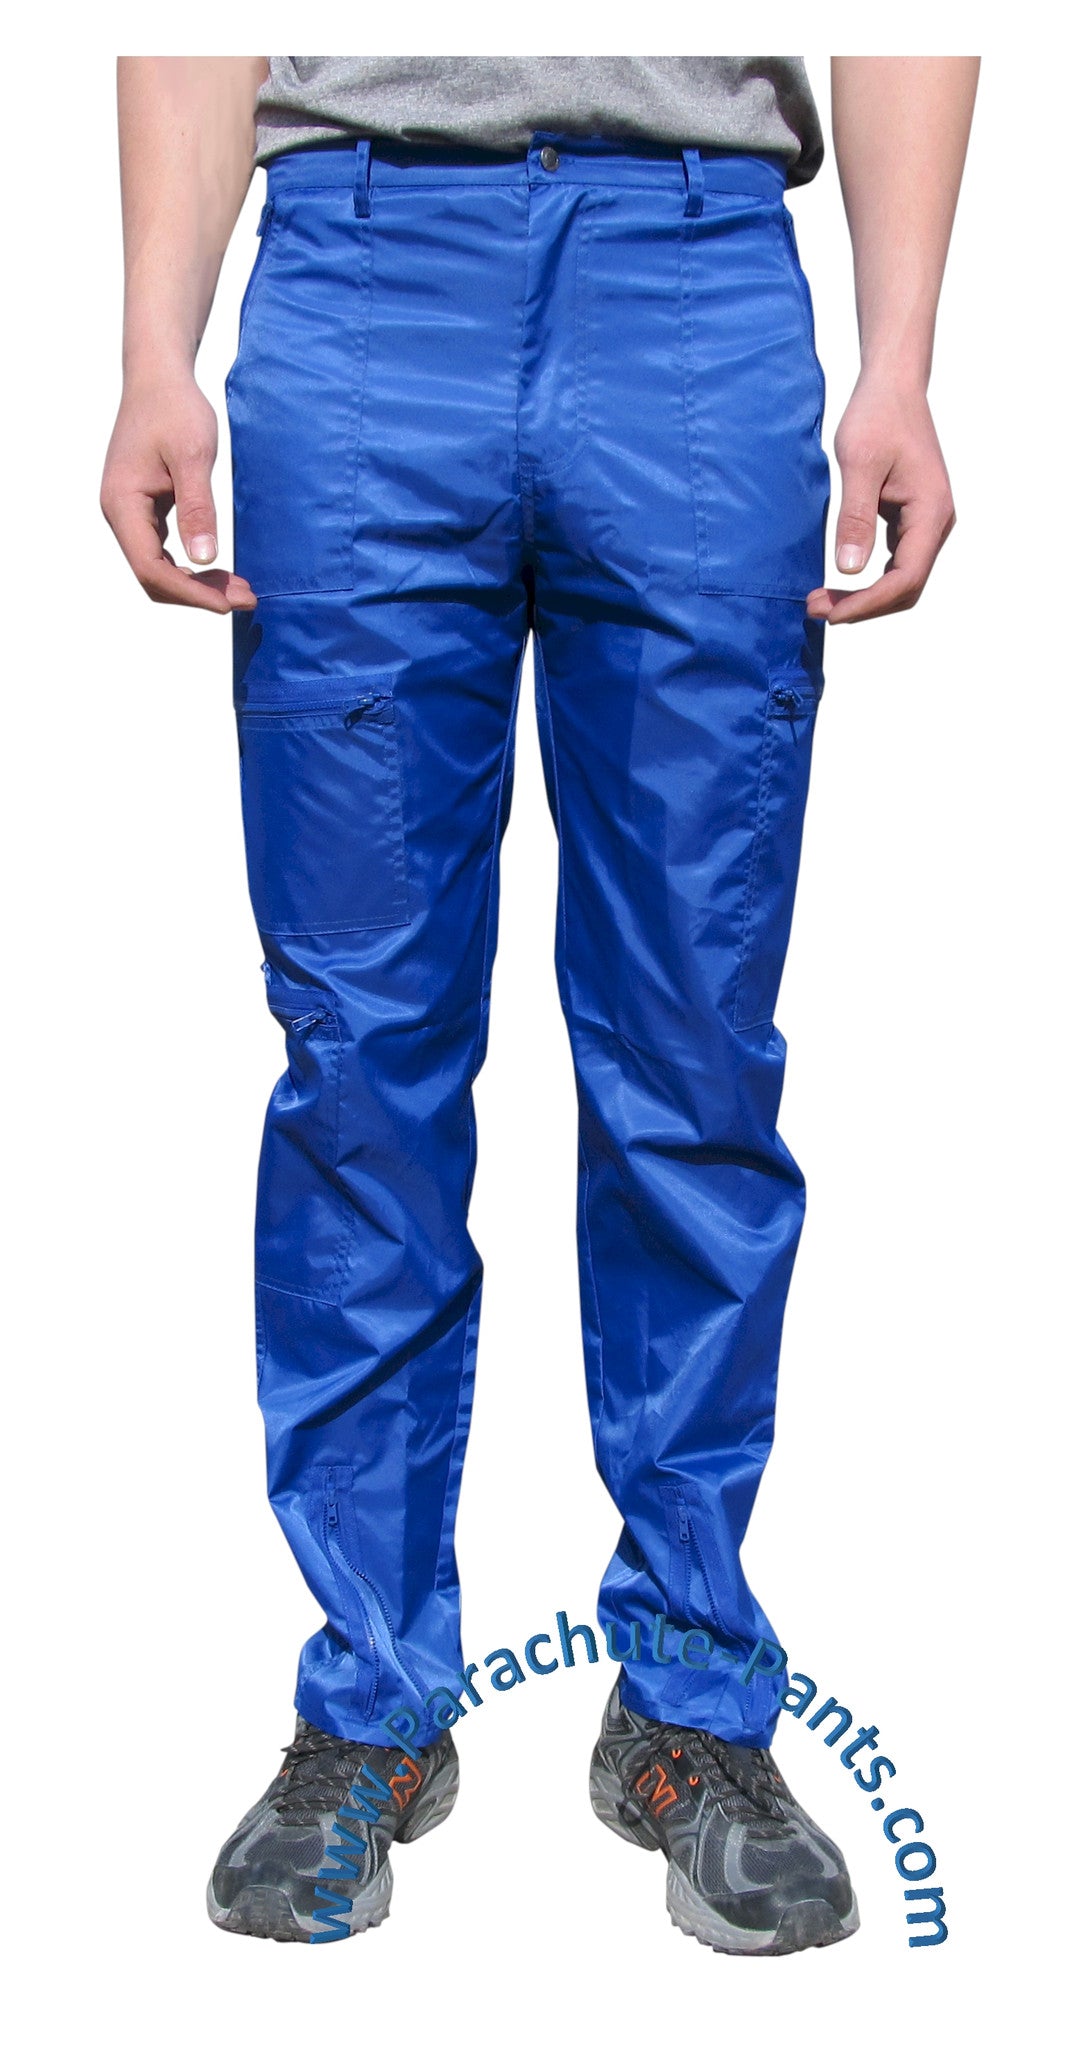 Countdown Blue Classic Nylon Parachute Pants with Blue Zippers | The